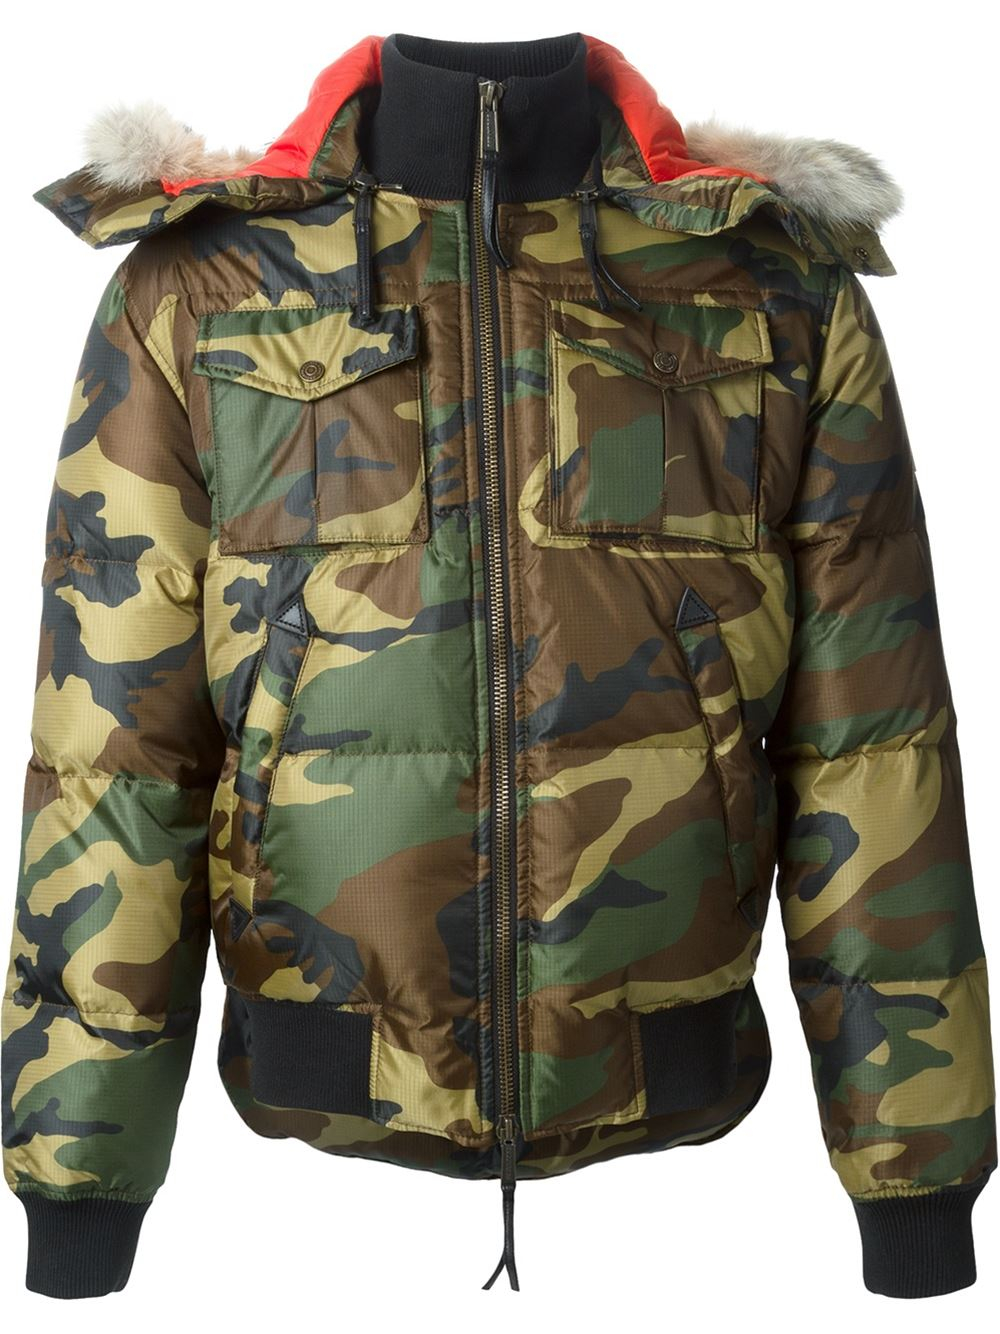 DSquared² Camouflage Jacket in Green for Men - Lyst